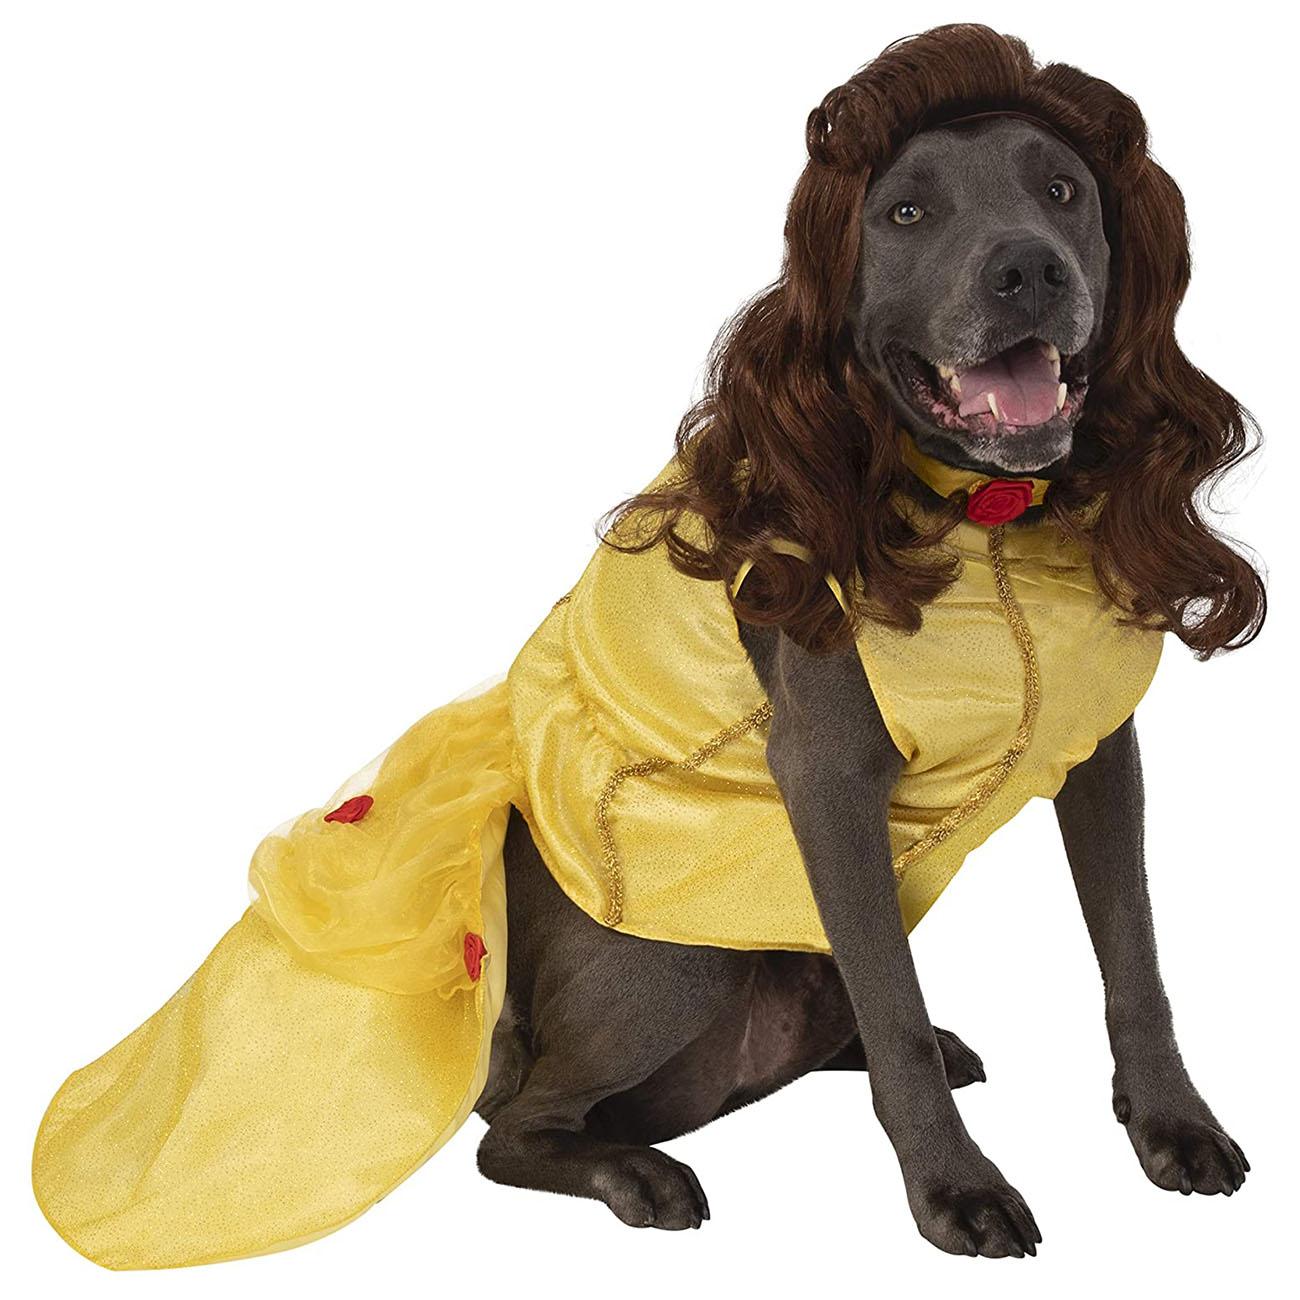 Disney's Big Dog Beauty and the Beast Belle Dog Costume by Rubie's